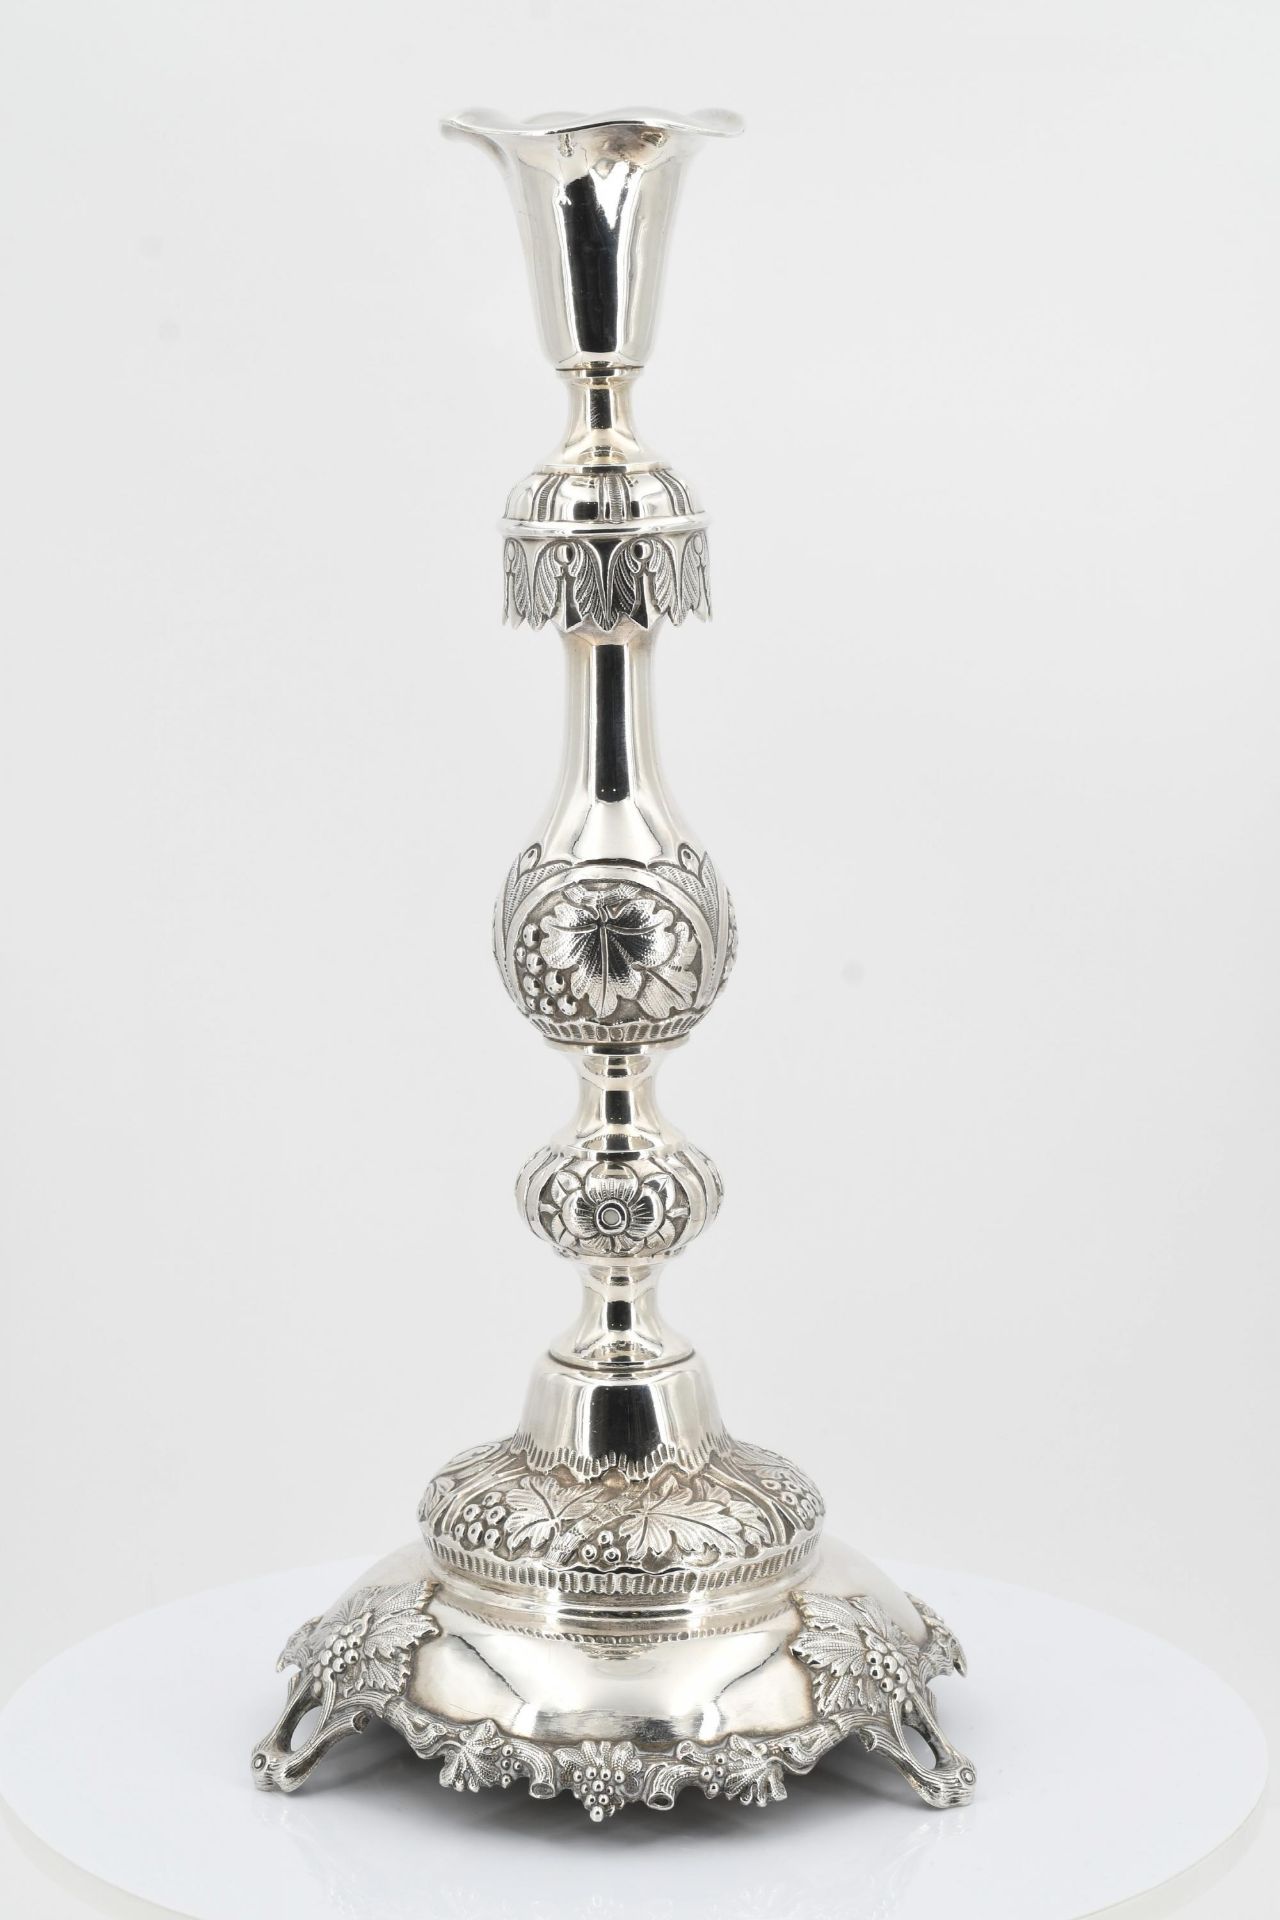 Pair of candlesticks with grape and vine décor - Image 8 of 11